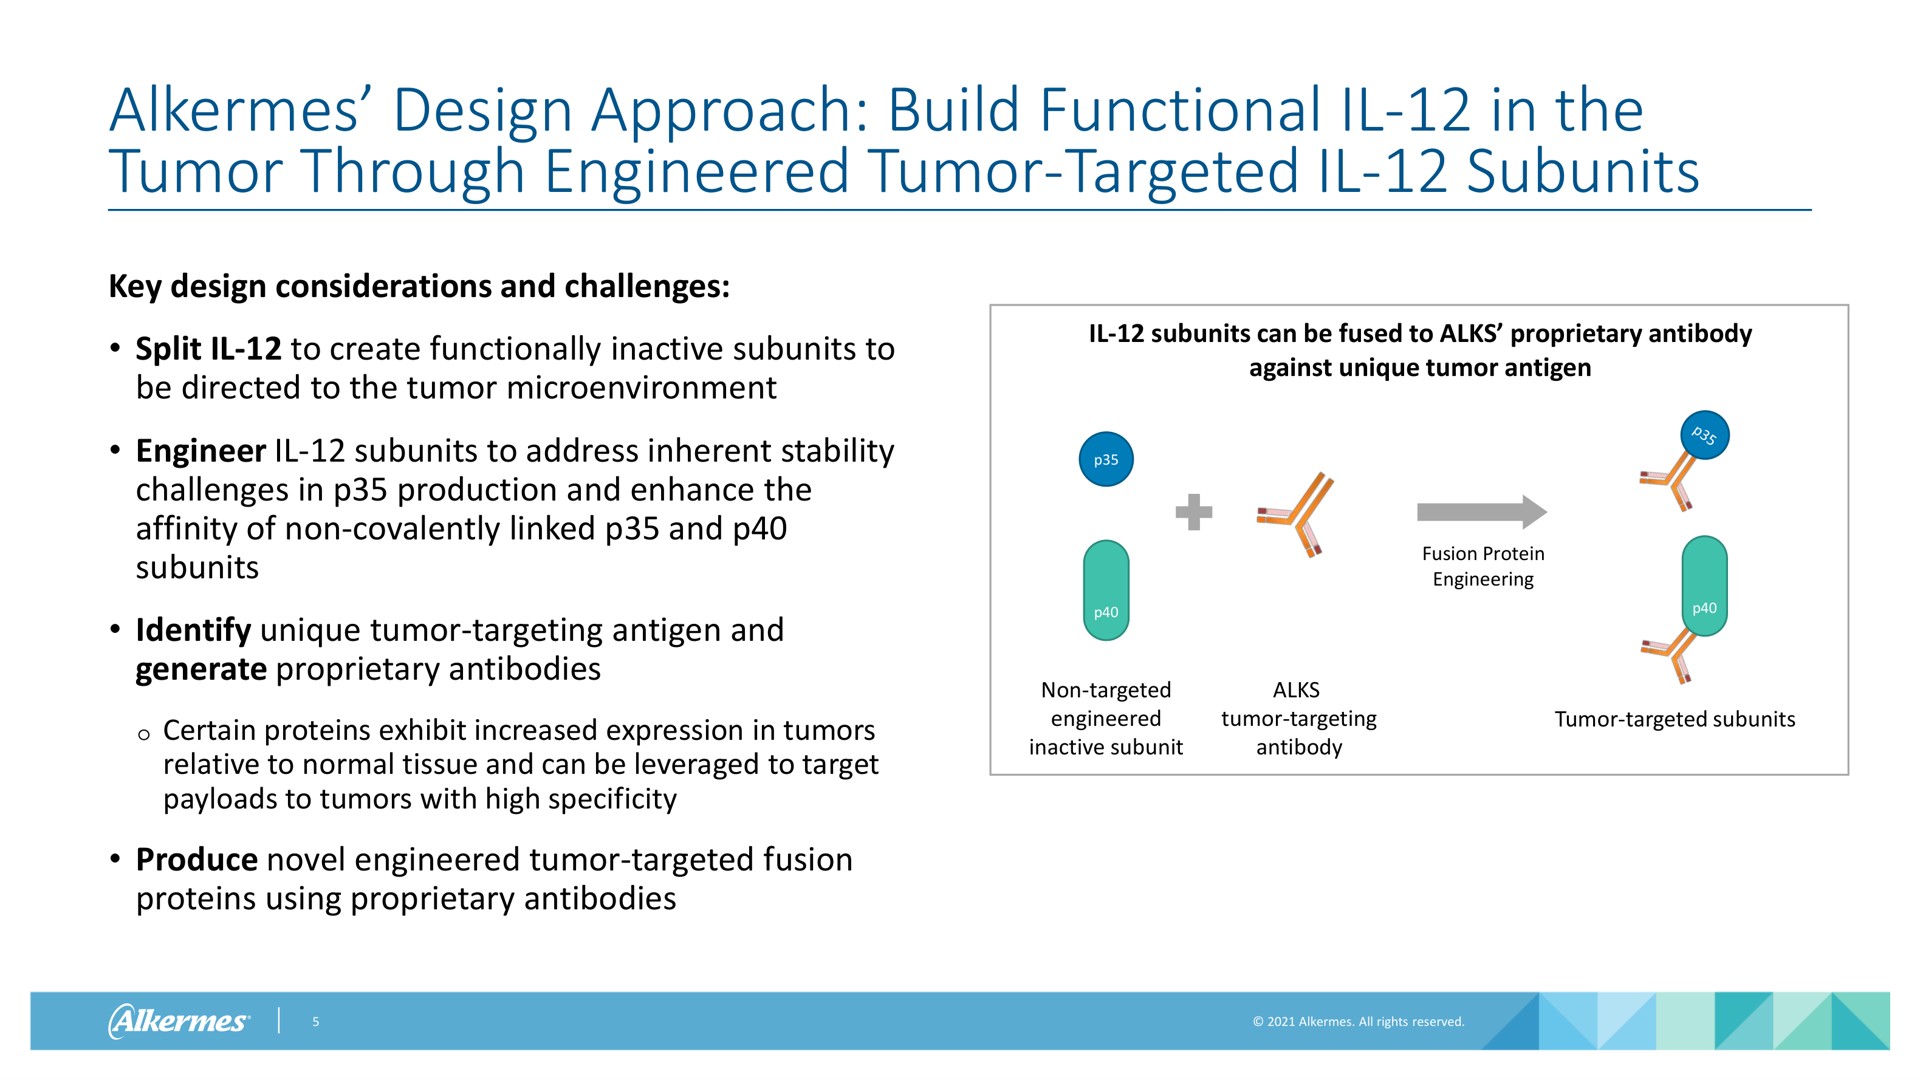 alkermes design approach build functional in the tumor through engineered tumor targeted subunits key design considerations and challenges split to create functionally inactive subunits to be directed to the tumor engineer subunits to address inherent stability challenges in production and enhance the affinity of non linked and subunits identify unique tumor targeting antigen and generate proprietary antibodies certain proteins exhibit increased expression in tumors relative to normal tissue and can be leveraged to target to tumors with high specificity produce novel engineered tumor targeted fusion proteins using proprietary antibodies subunits can be fused to proprietary antibody against unique tumor antigen fusion protein engineering non targeted engineered inactive subunit tumor targeting antibody tumor targeted subunits | Alkermes